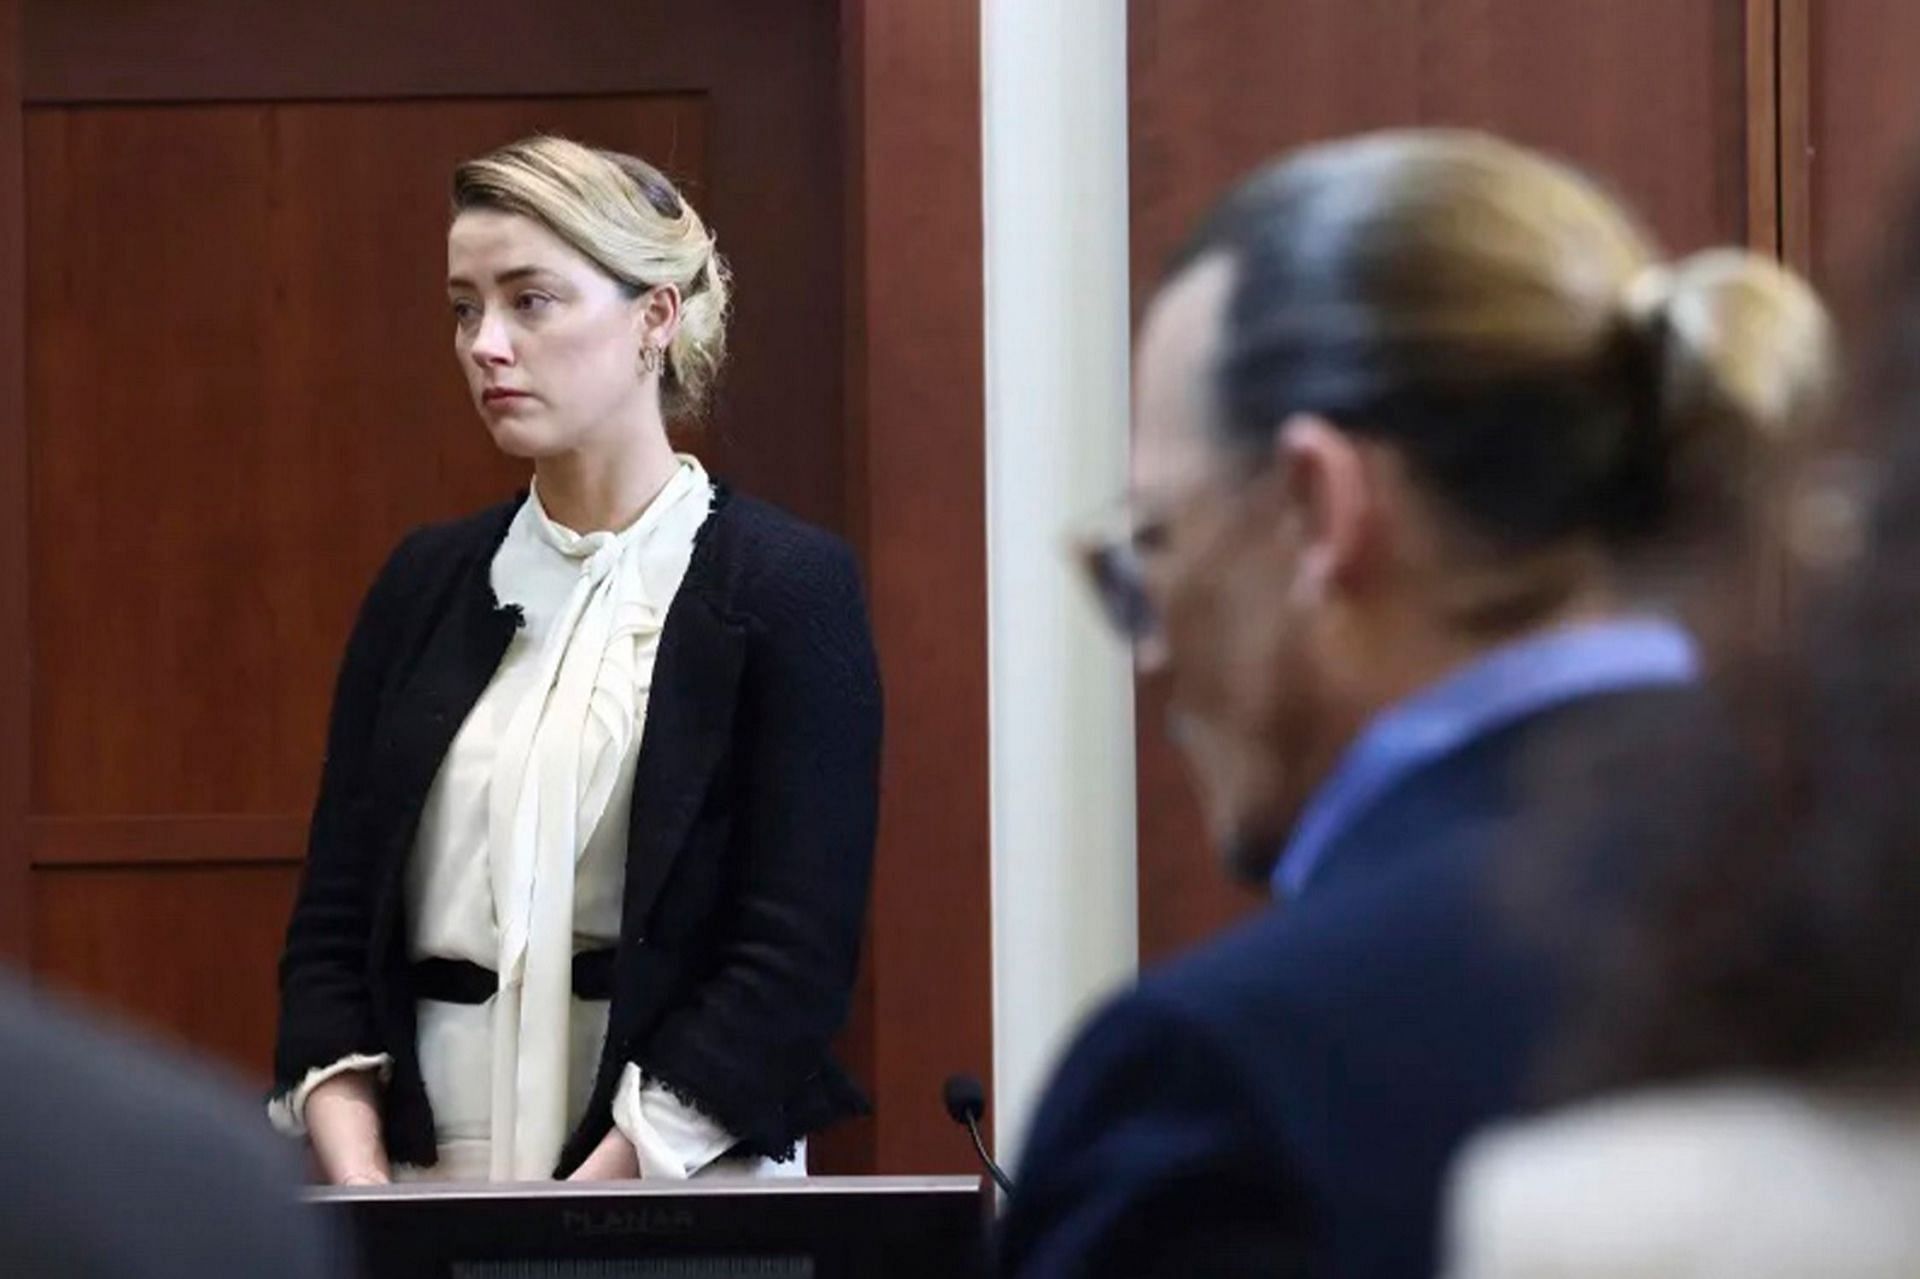 Amber Heard and Johnny Depp in court (Image via Jim Lo Scalzo/AFP/Getty Images)